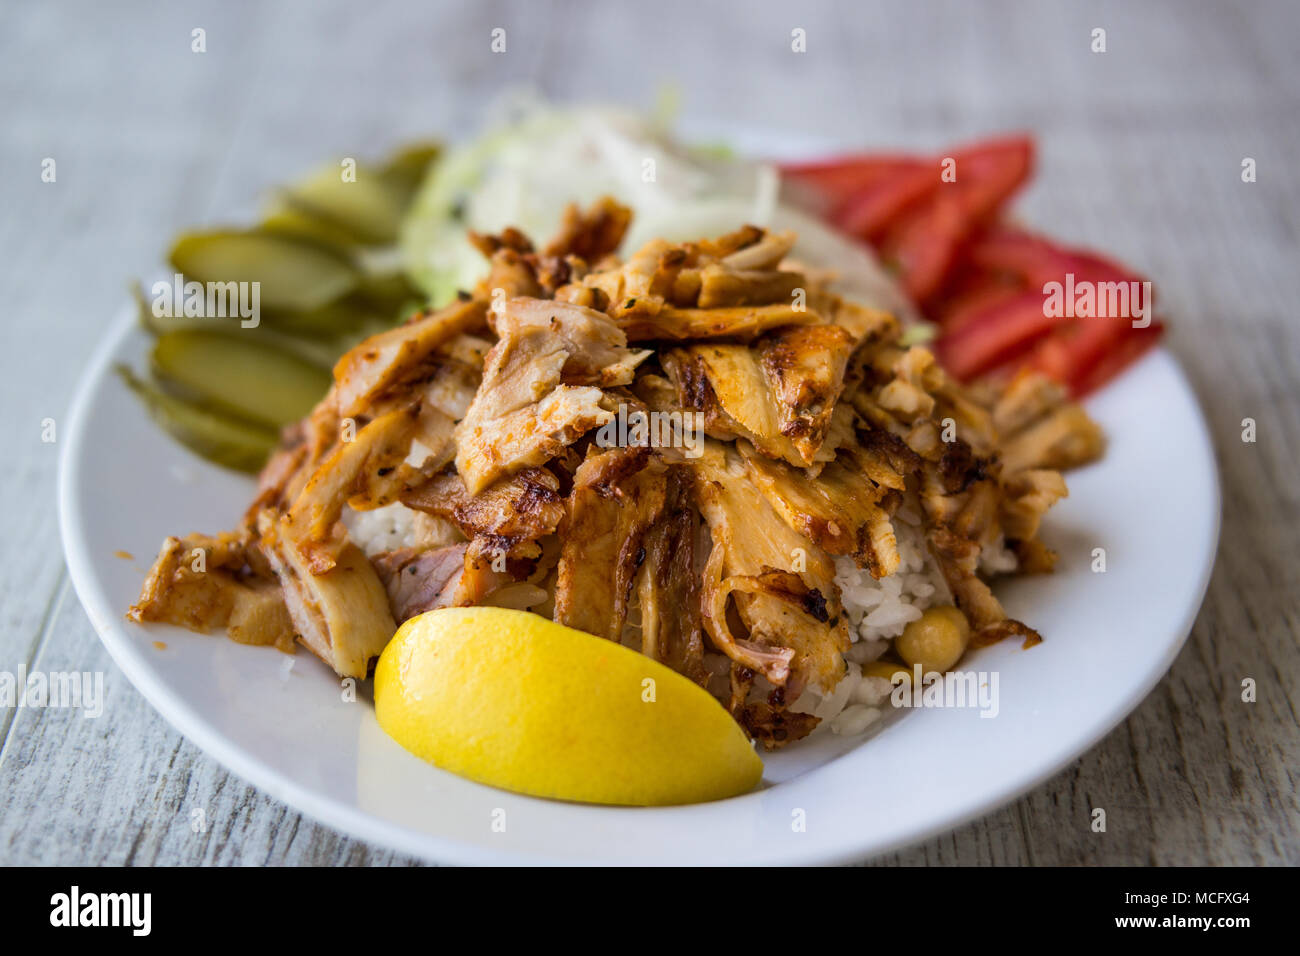 Doner Plate High Resolution Stock Photography and Images - Alamy